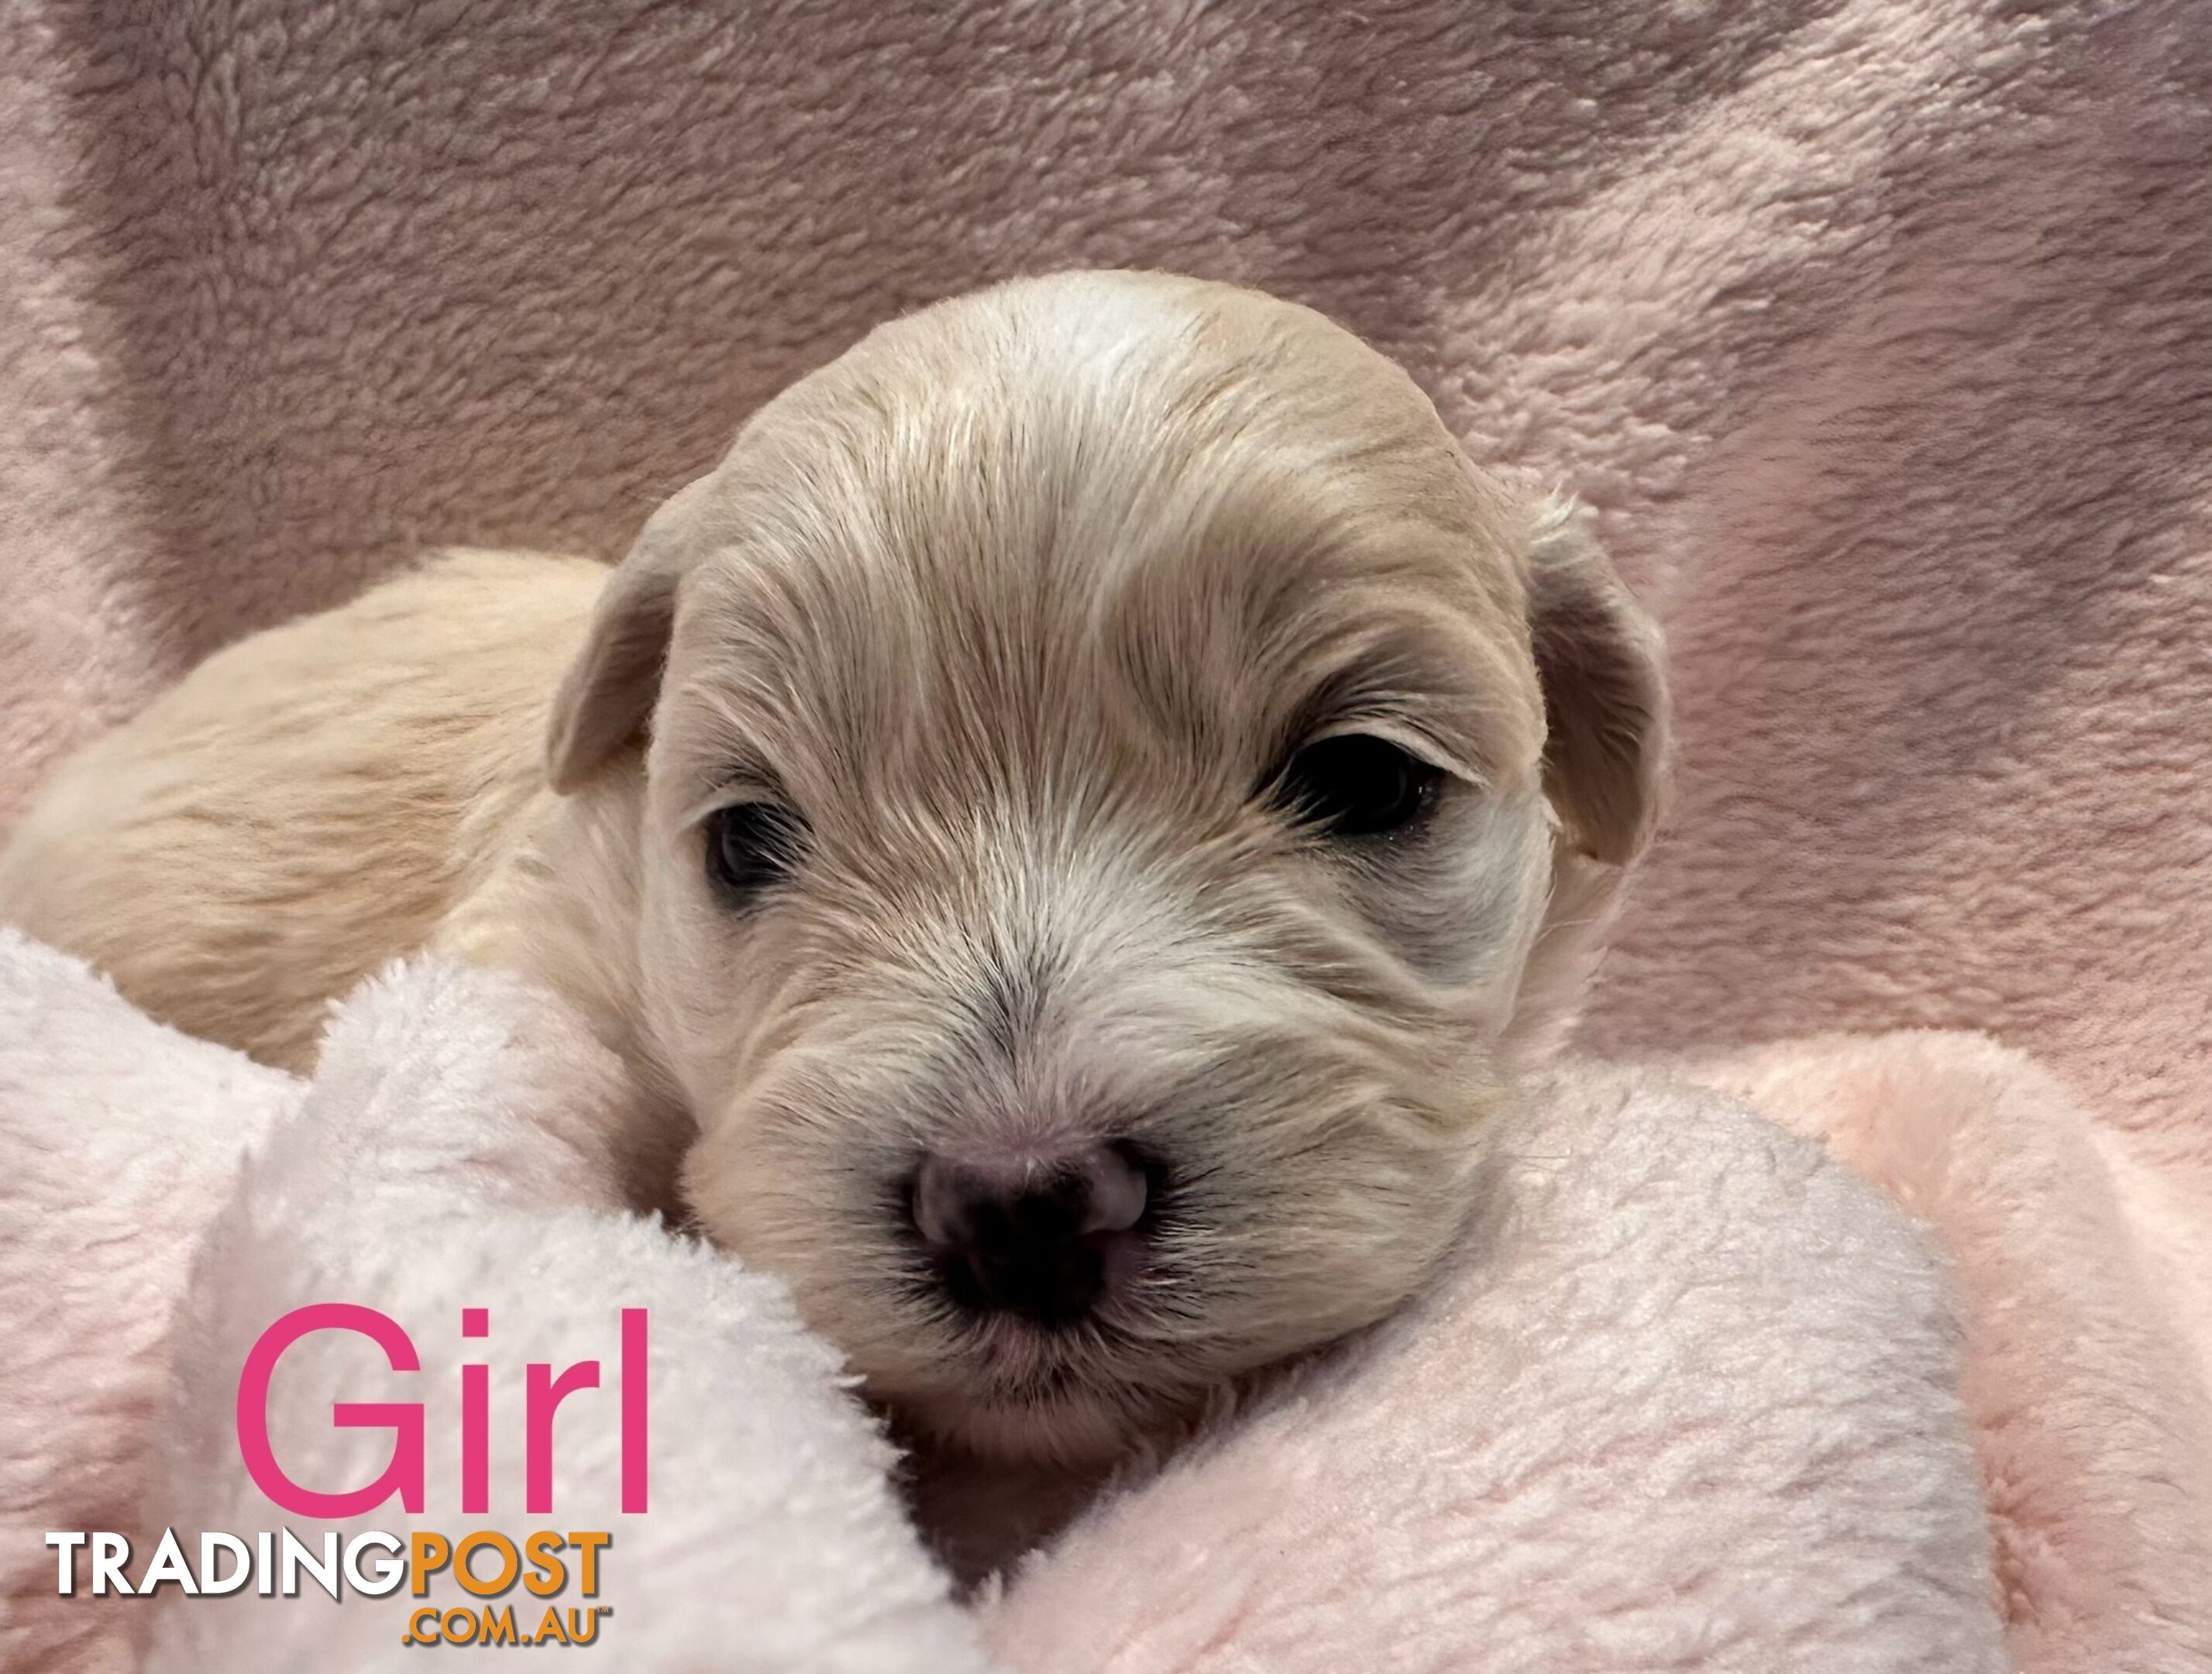 Moodle (Maltese cross Toy poodle) puppies male and female